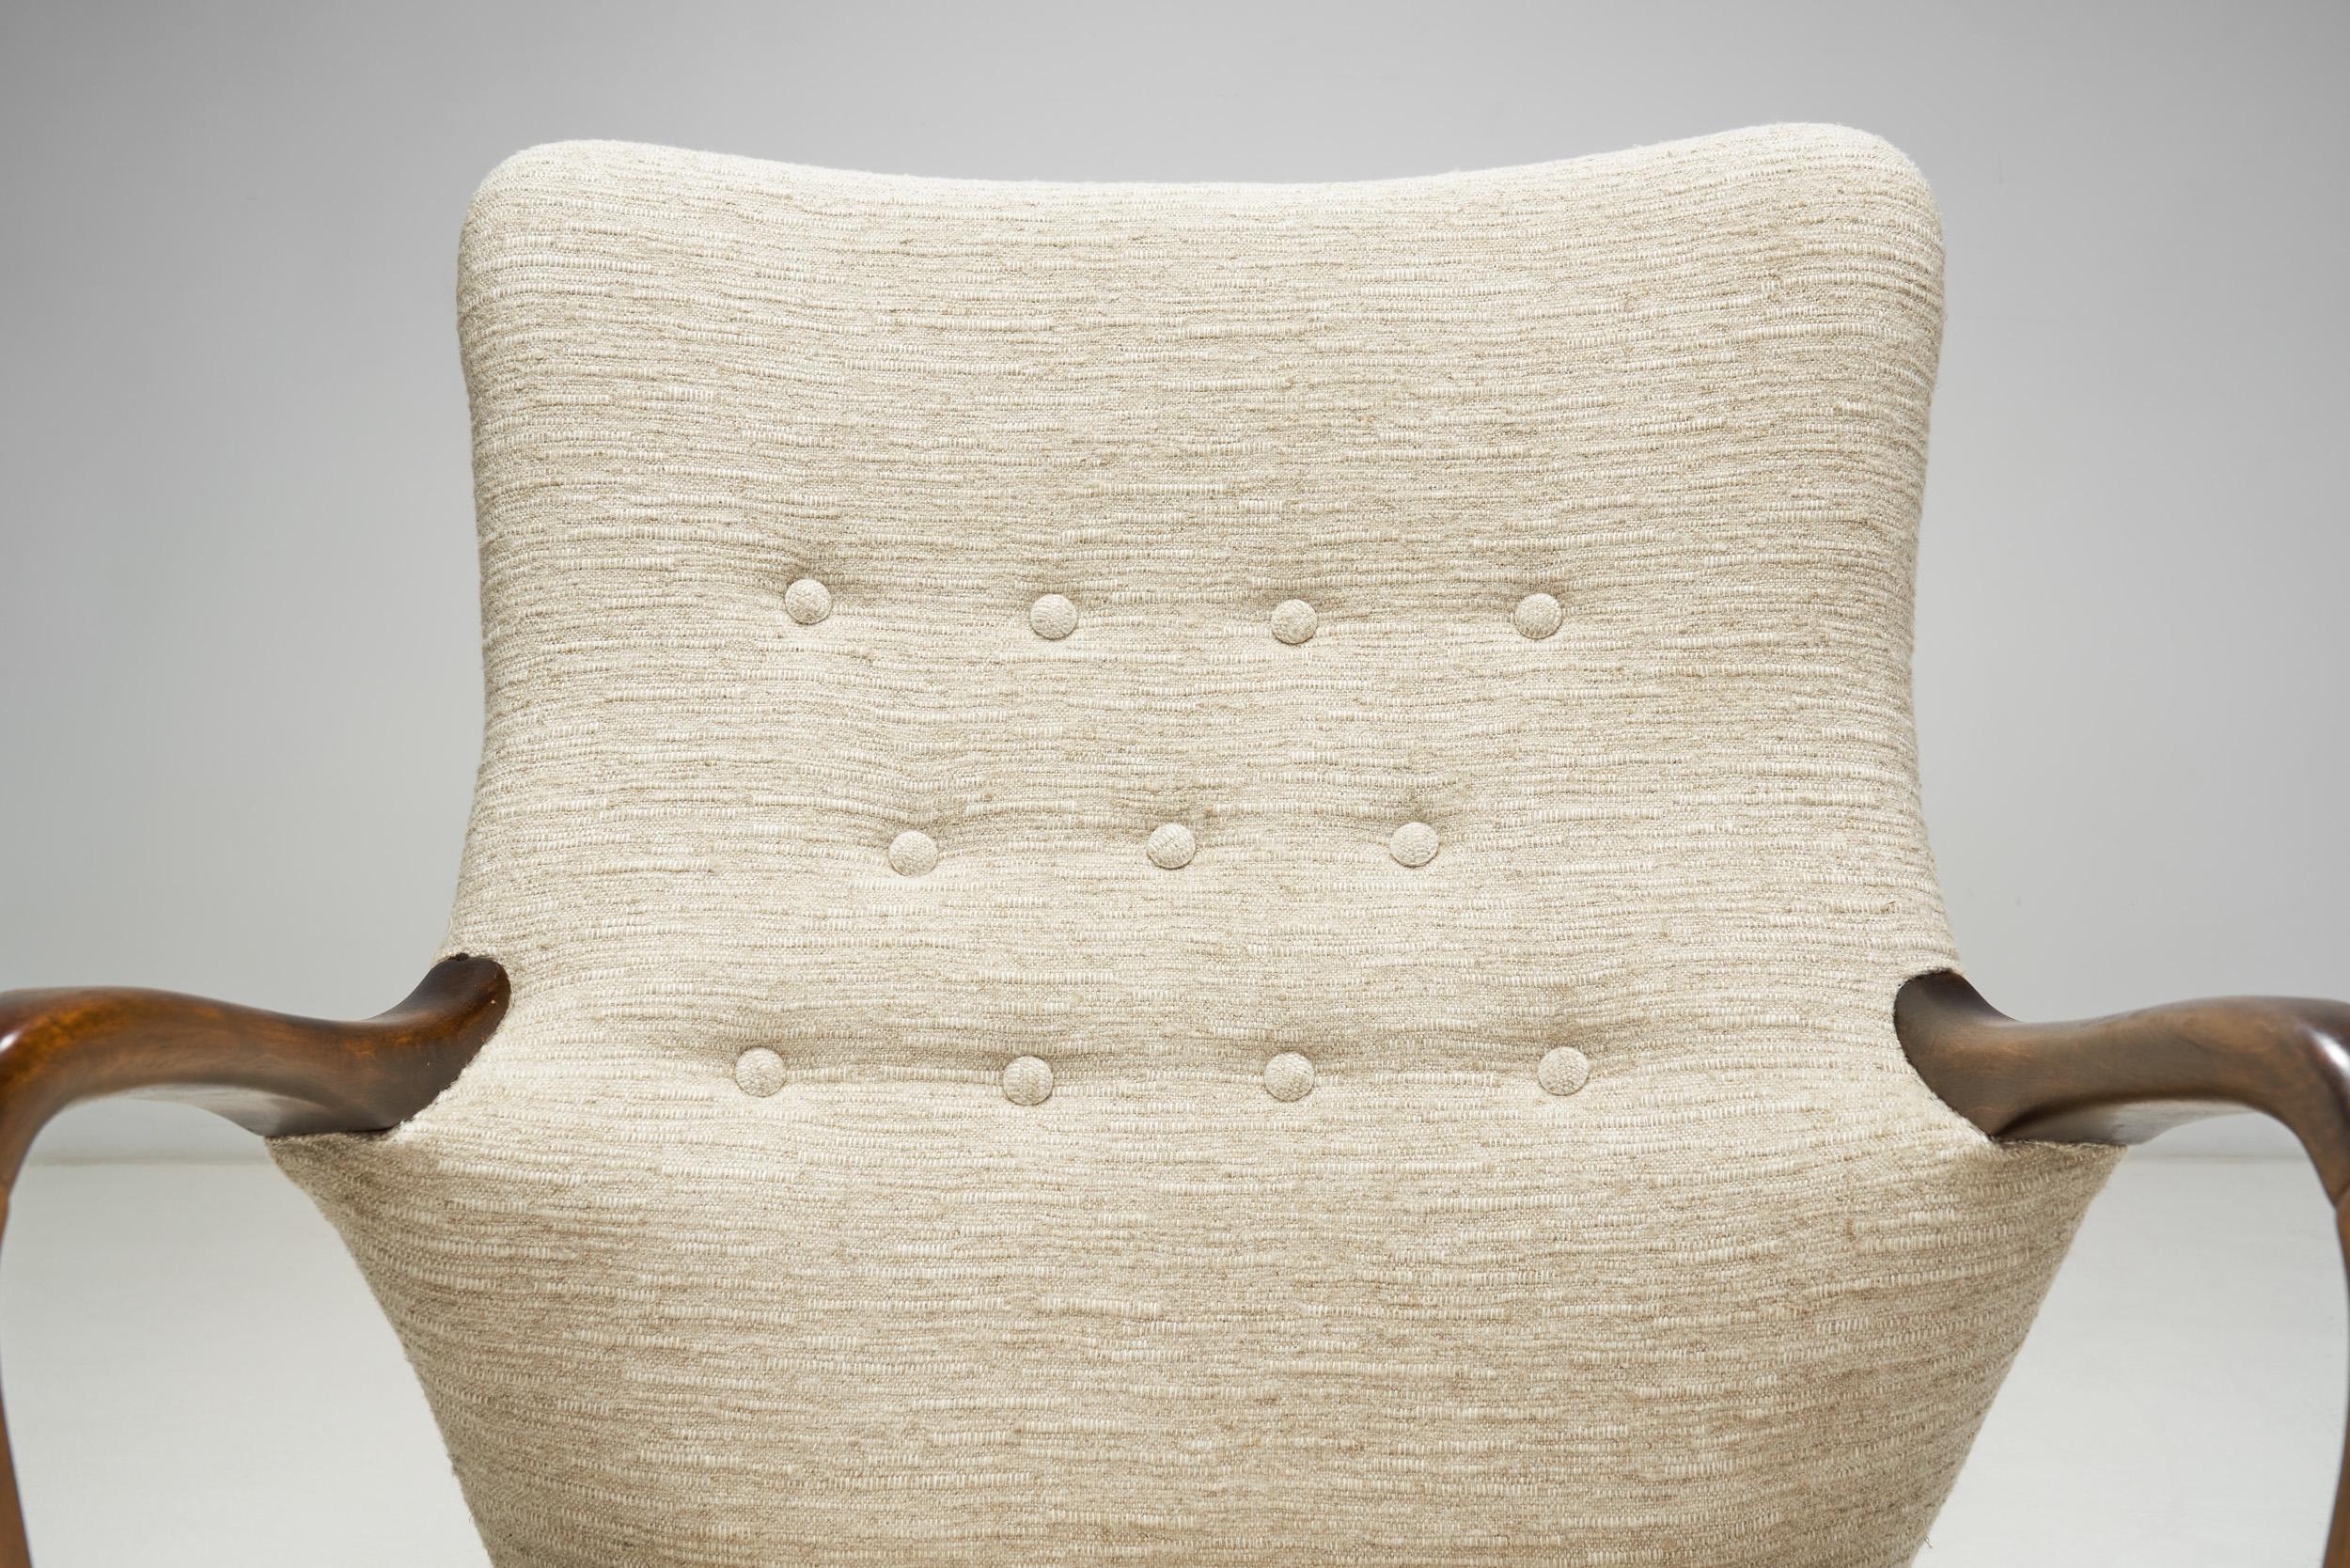 Mid-20th Century Swedish Upholstered Wooden Armchair with Curved Arms, Sweden ca 1940s For Sale